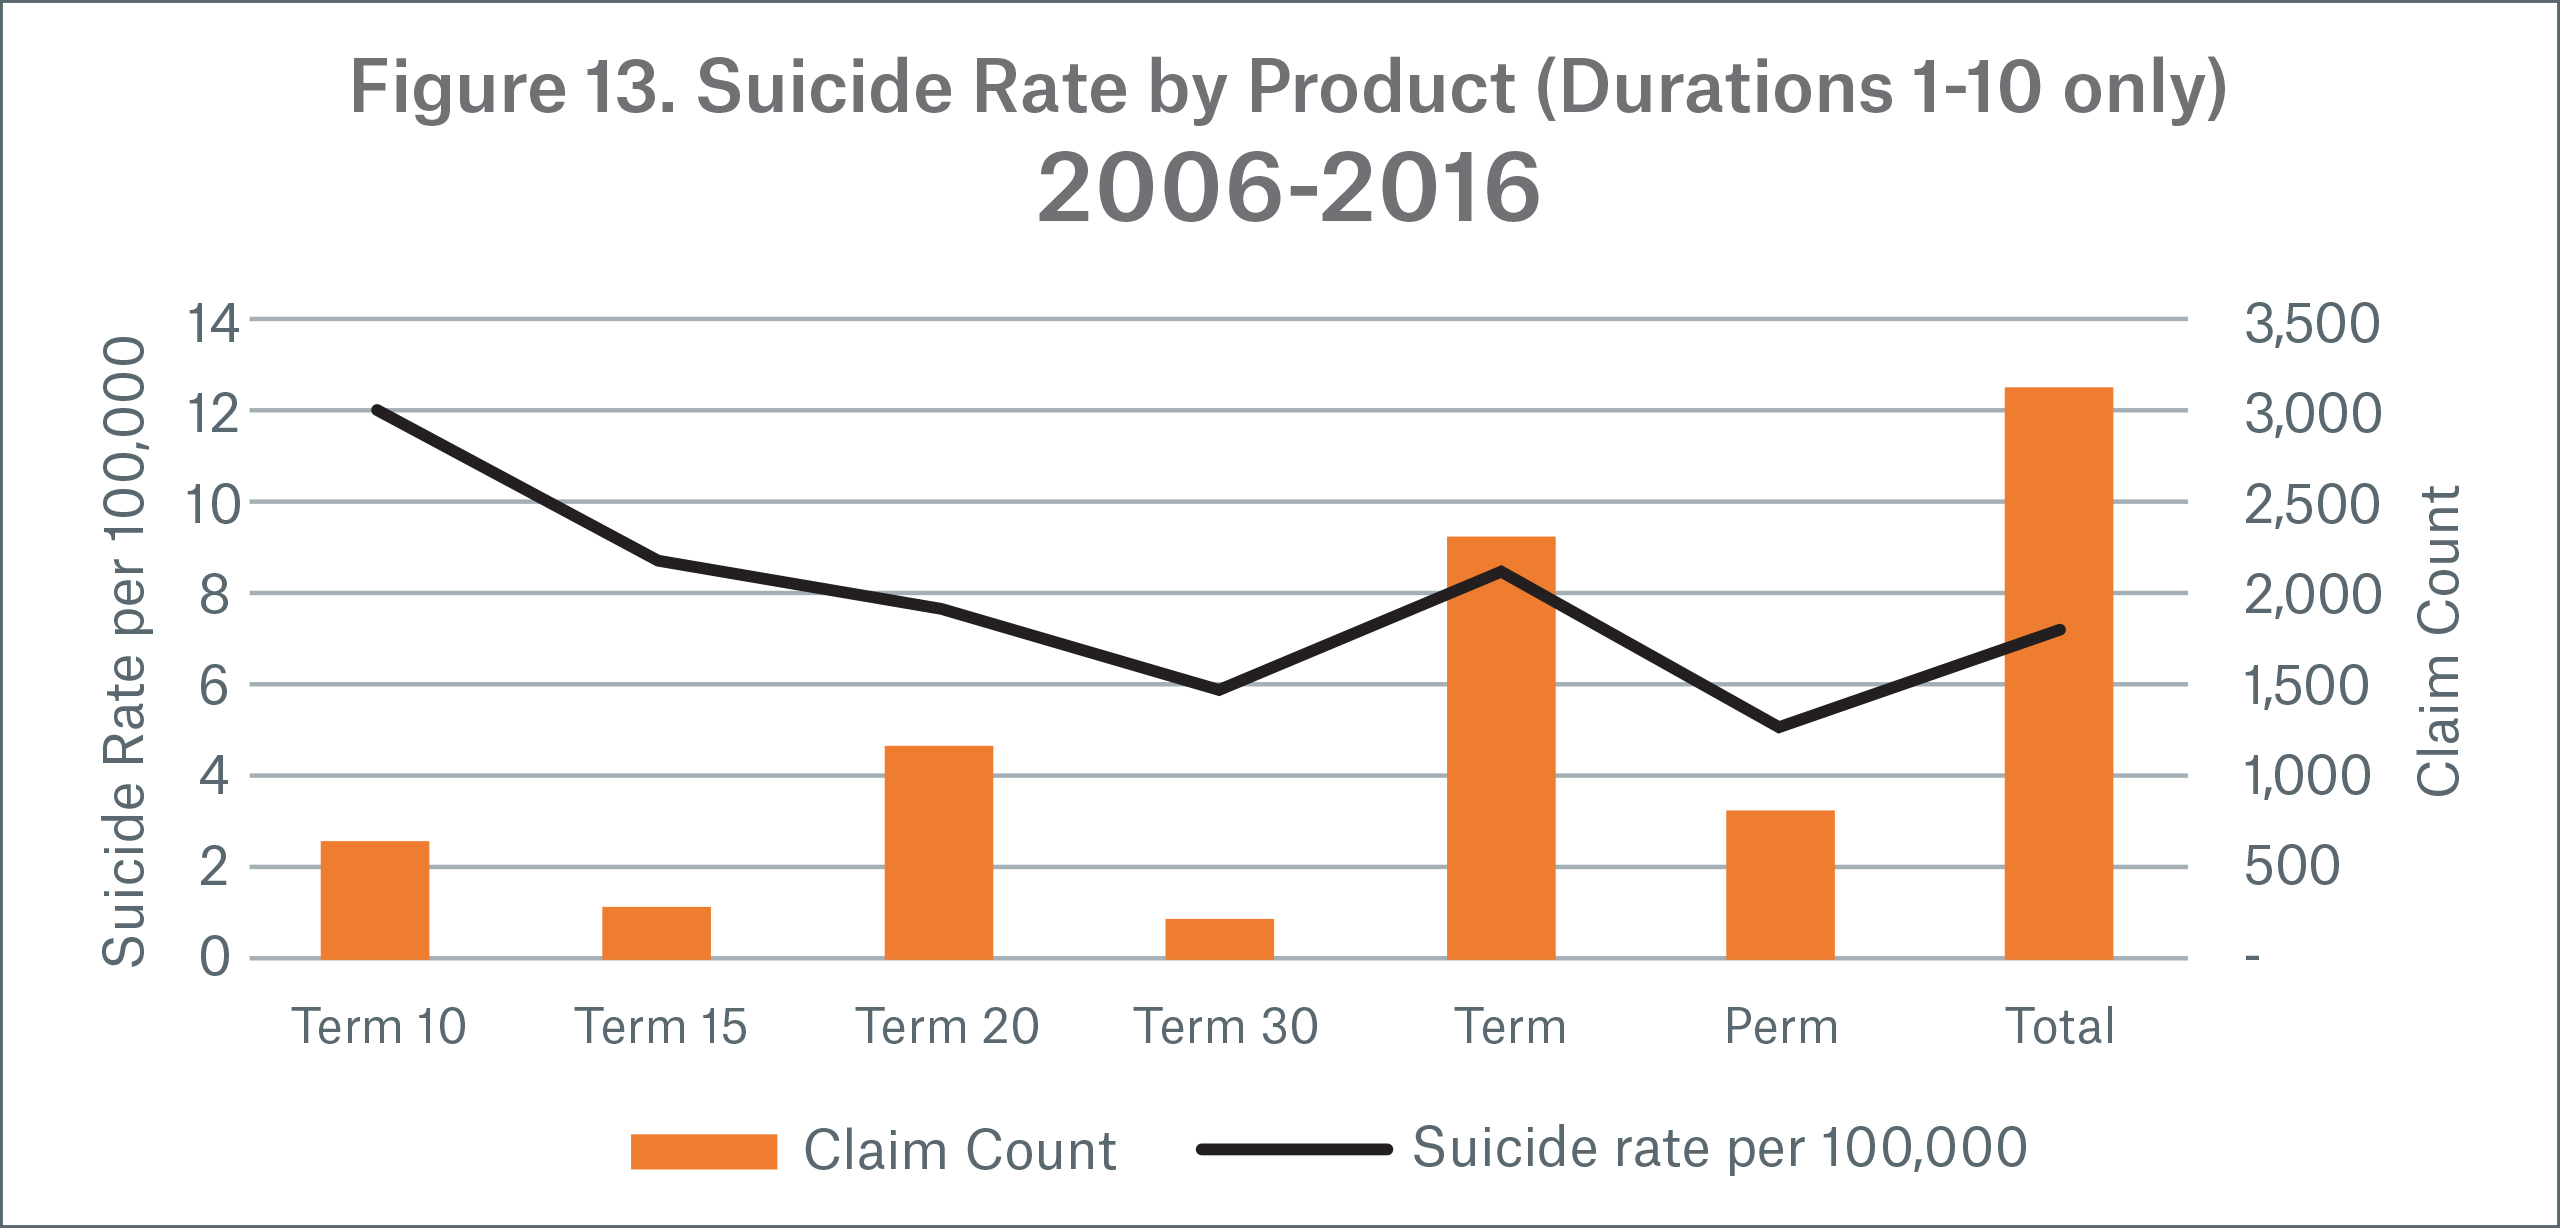 Figure 13 Image Suicide Rate by Product (Durations 1-10 only)